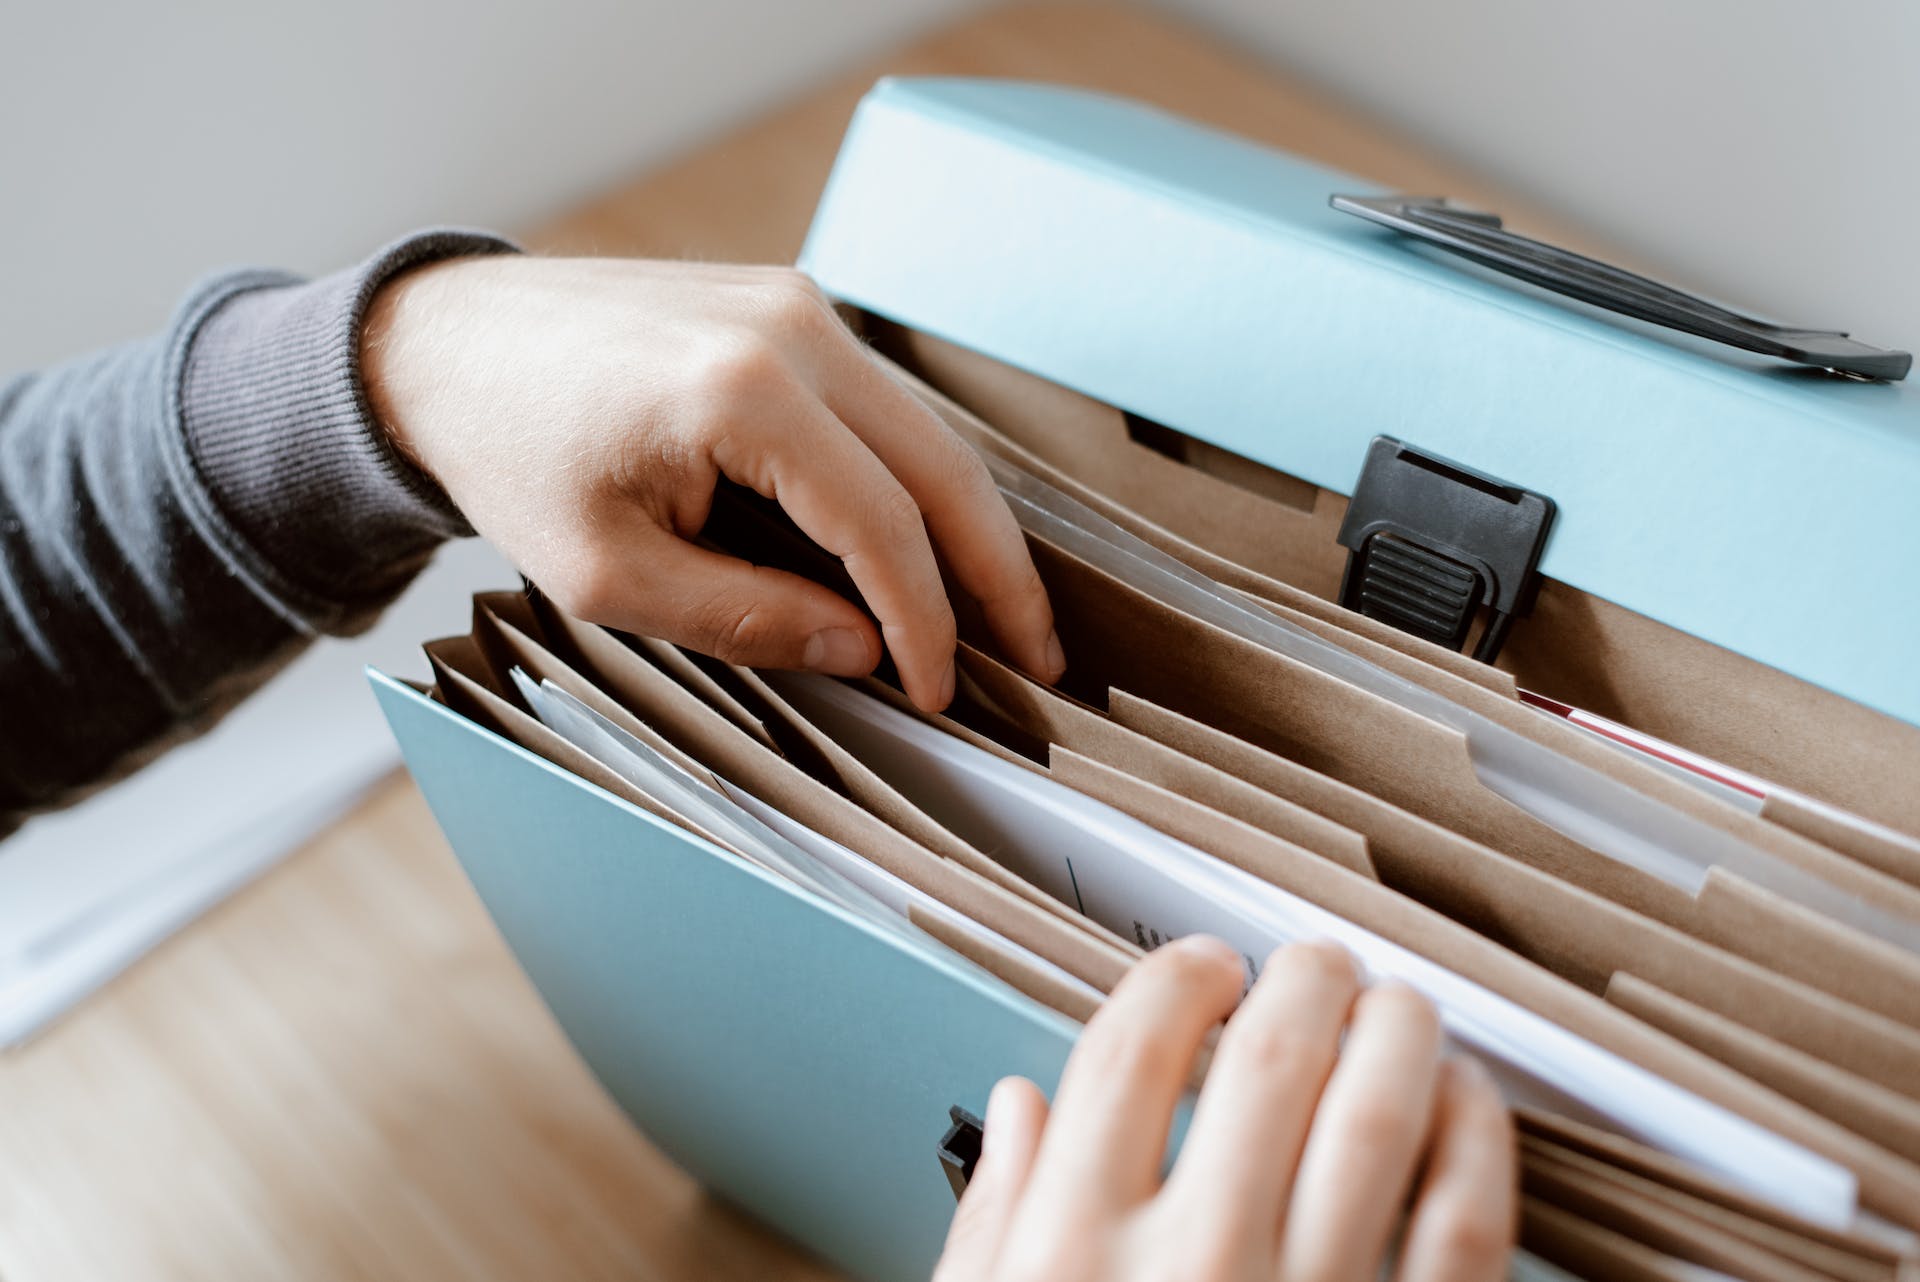 A person holding a folder of documents | Source: Pexels